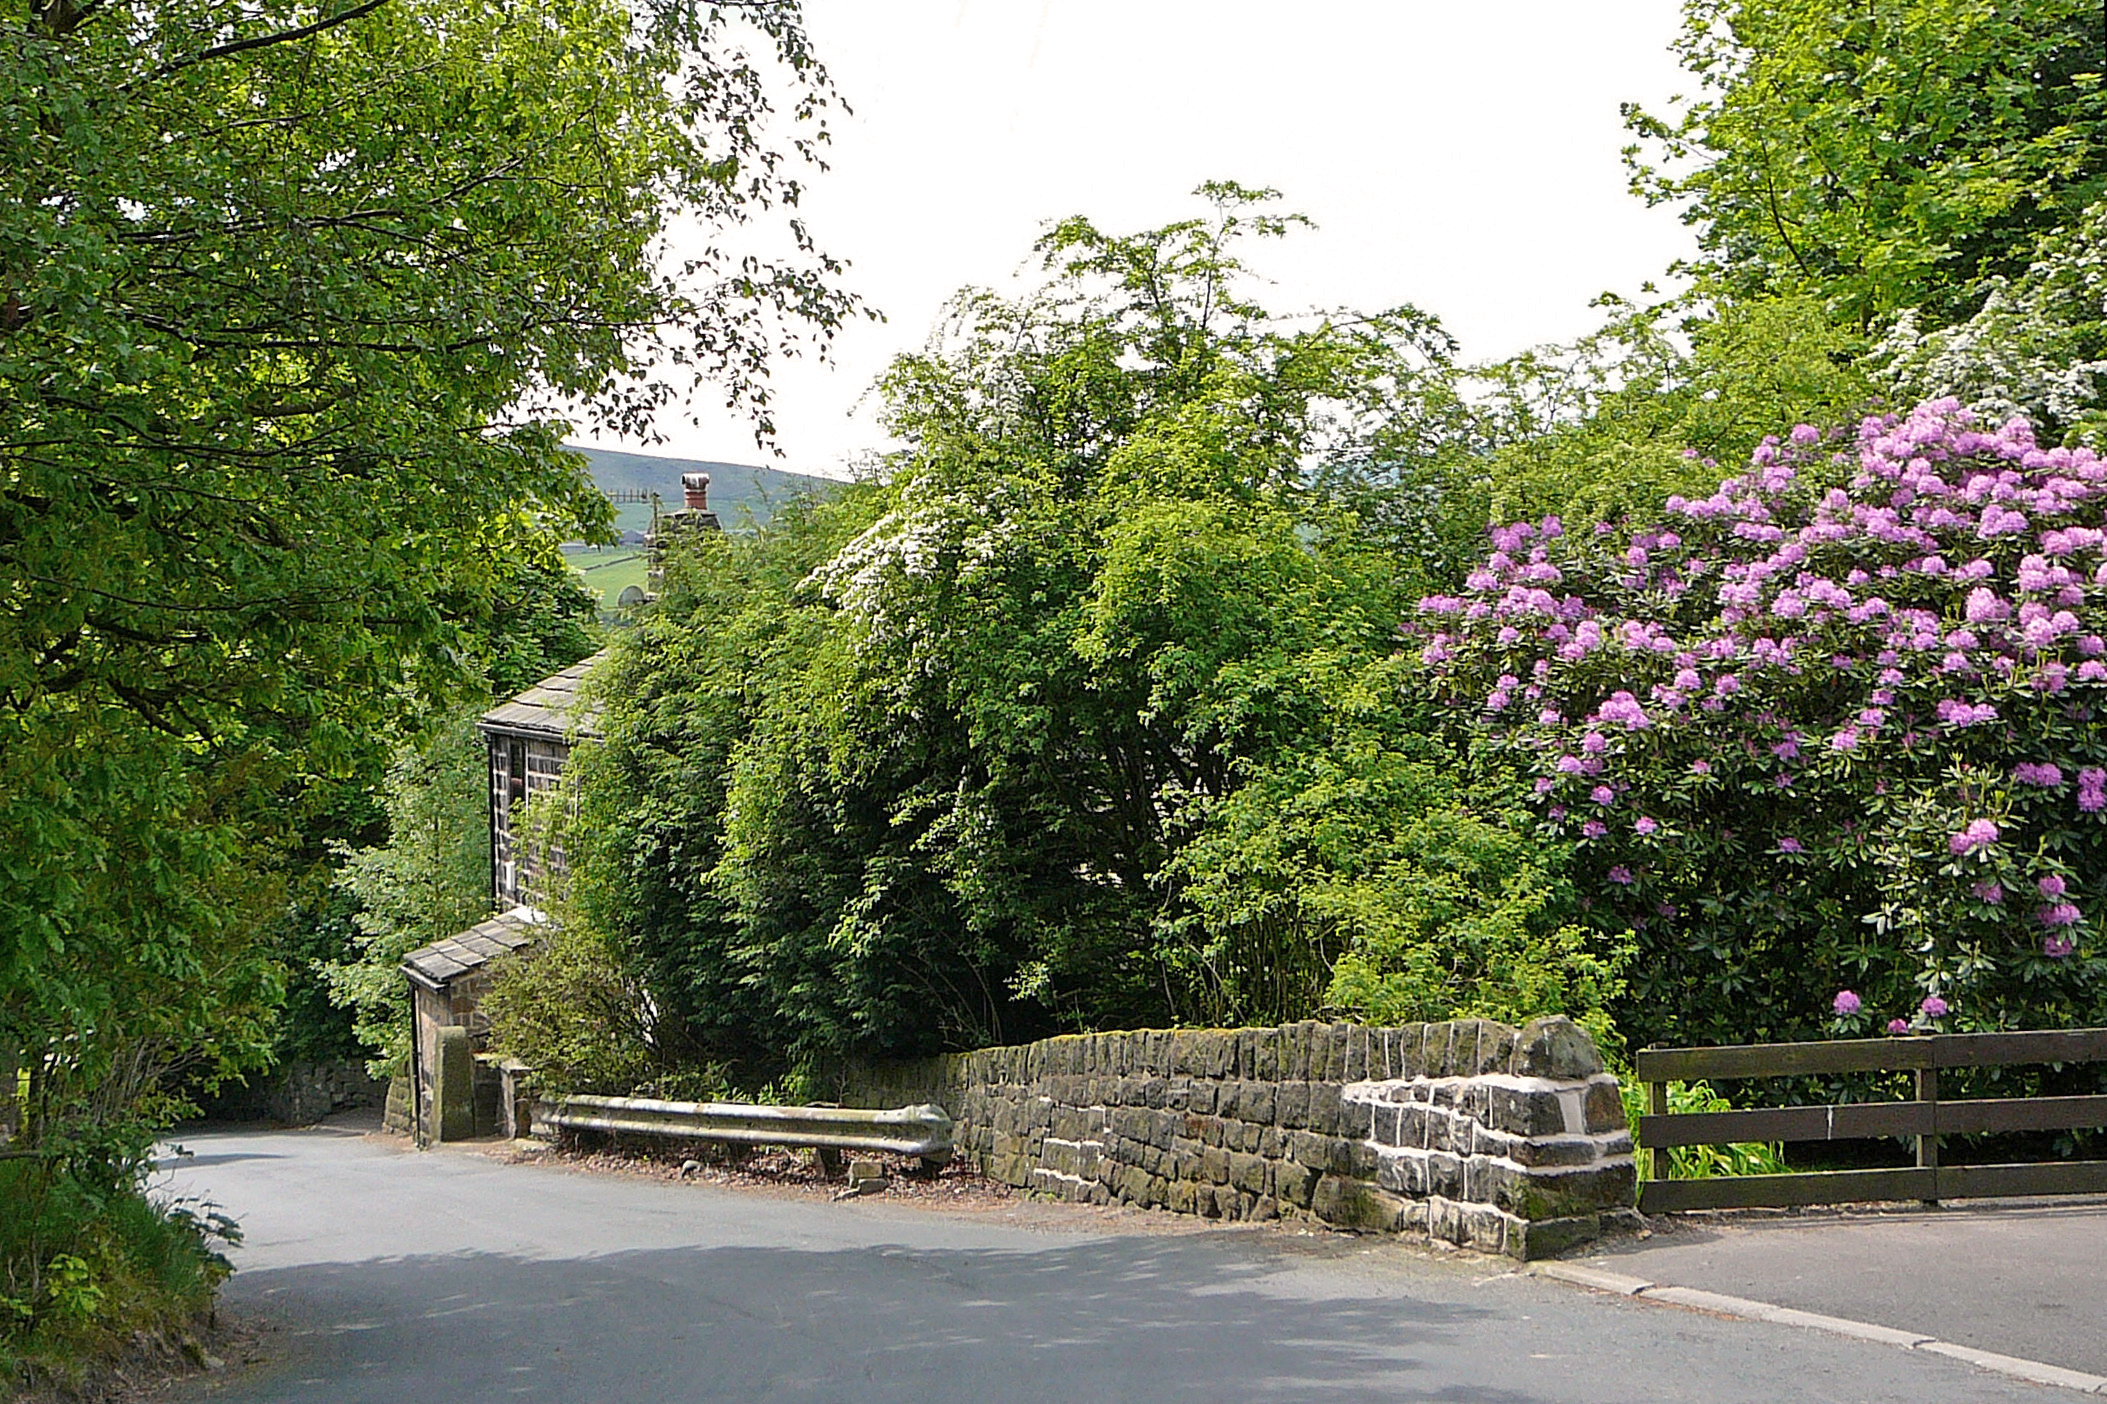 a stone wall on the side of the road with flowers and trees